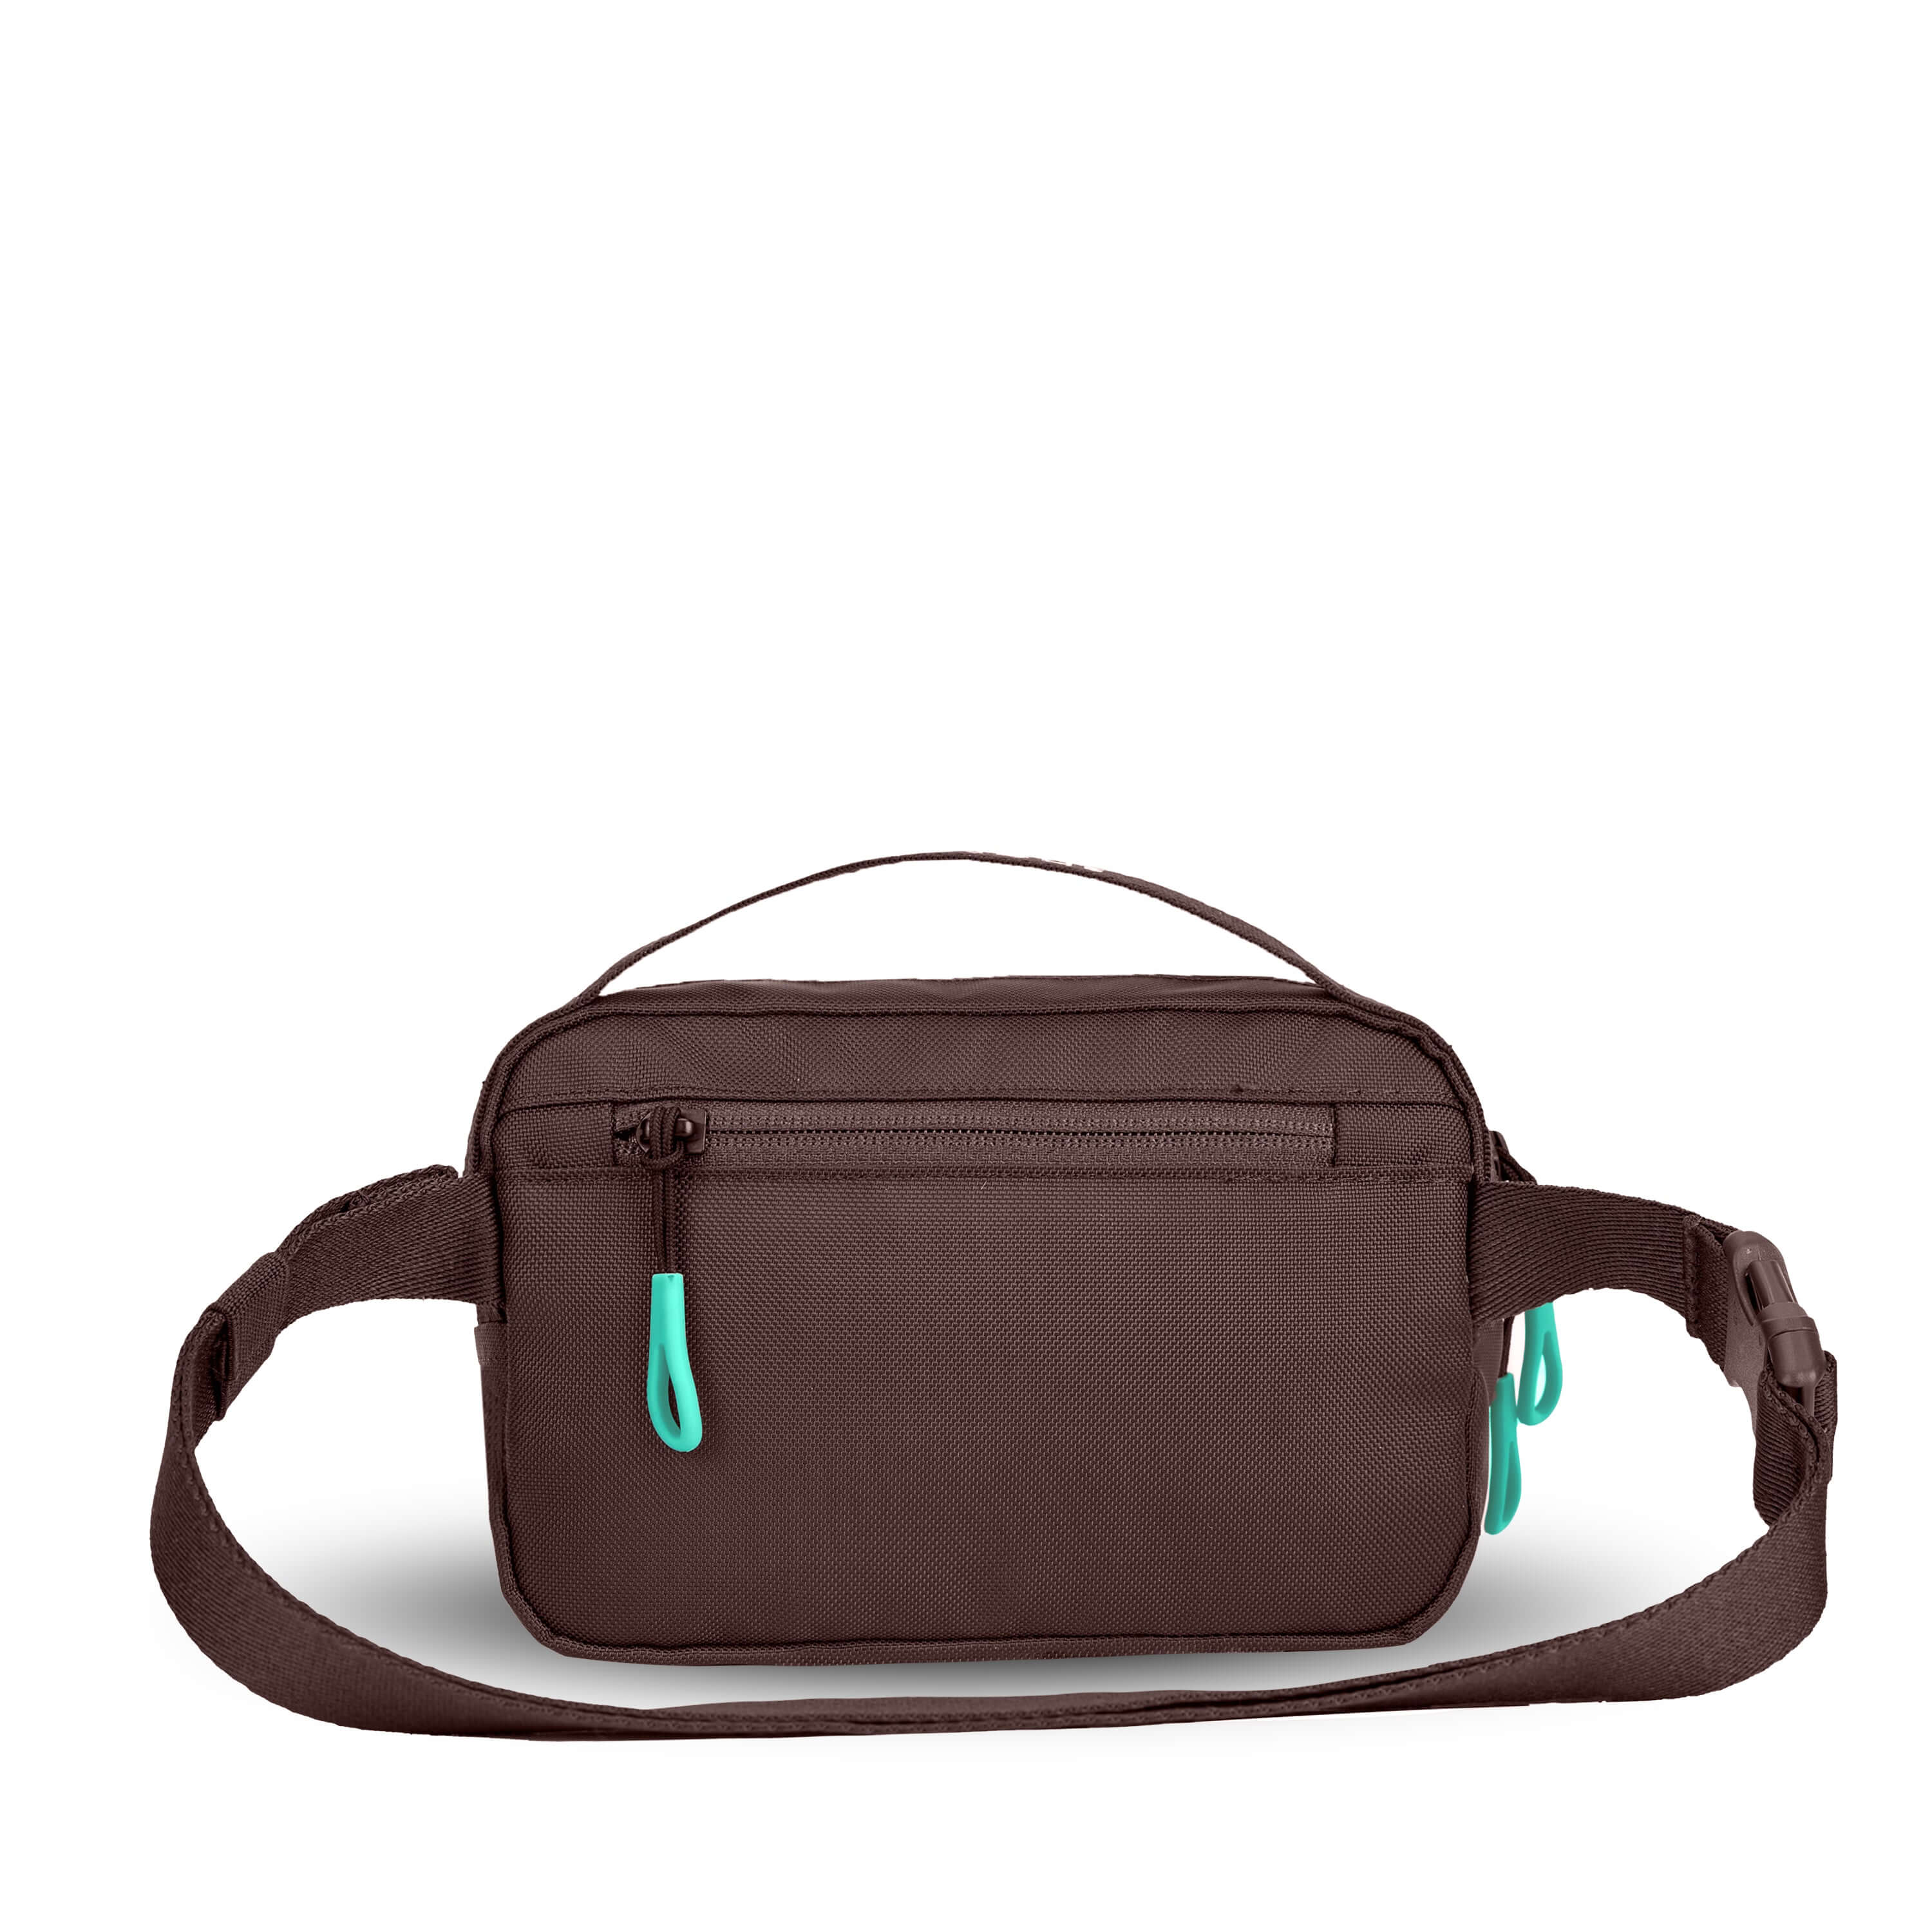 Back view of Sherpani's fanny pack, the Hyk in Seagreen. The back of the bag is brown. Easy-pull zippers are accented in light green. The fanny pack features an adjustable strap with a buckle. 